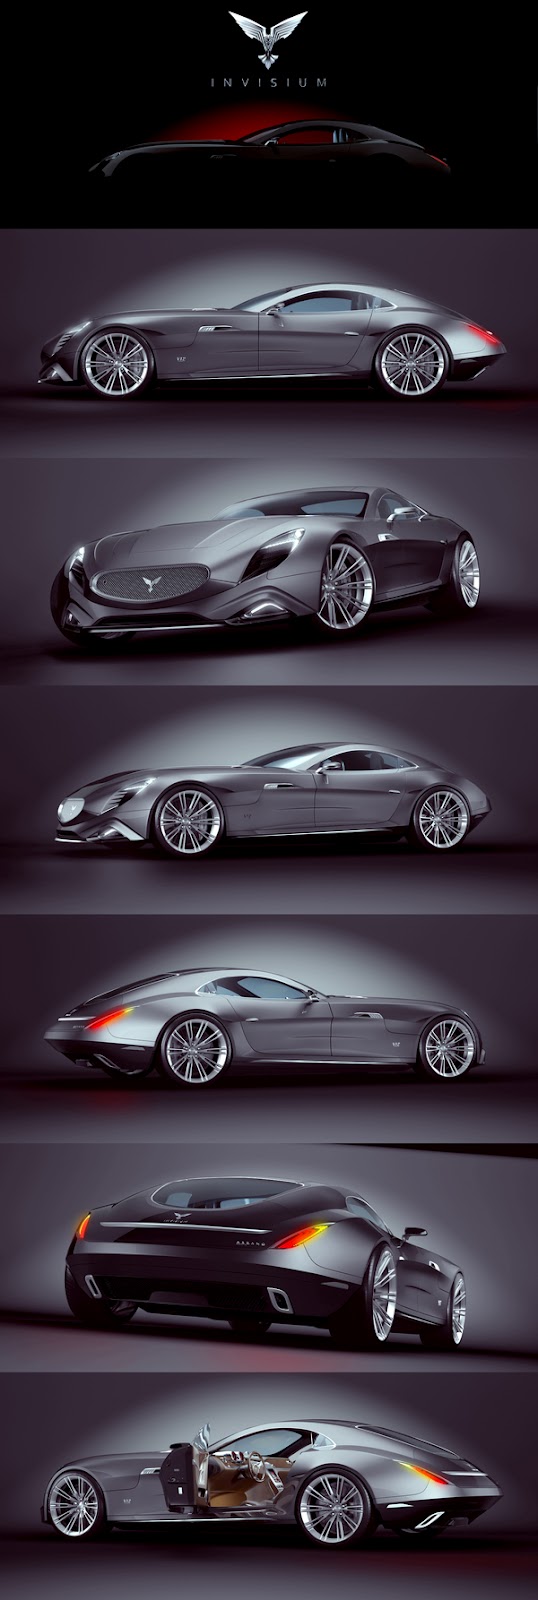 New Concept Cars